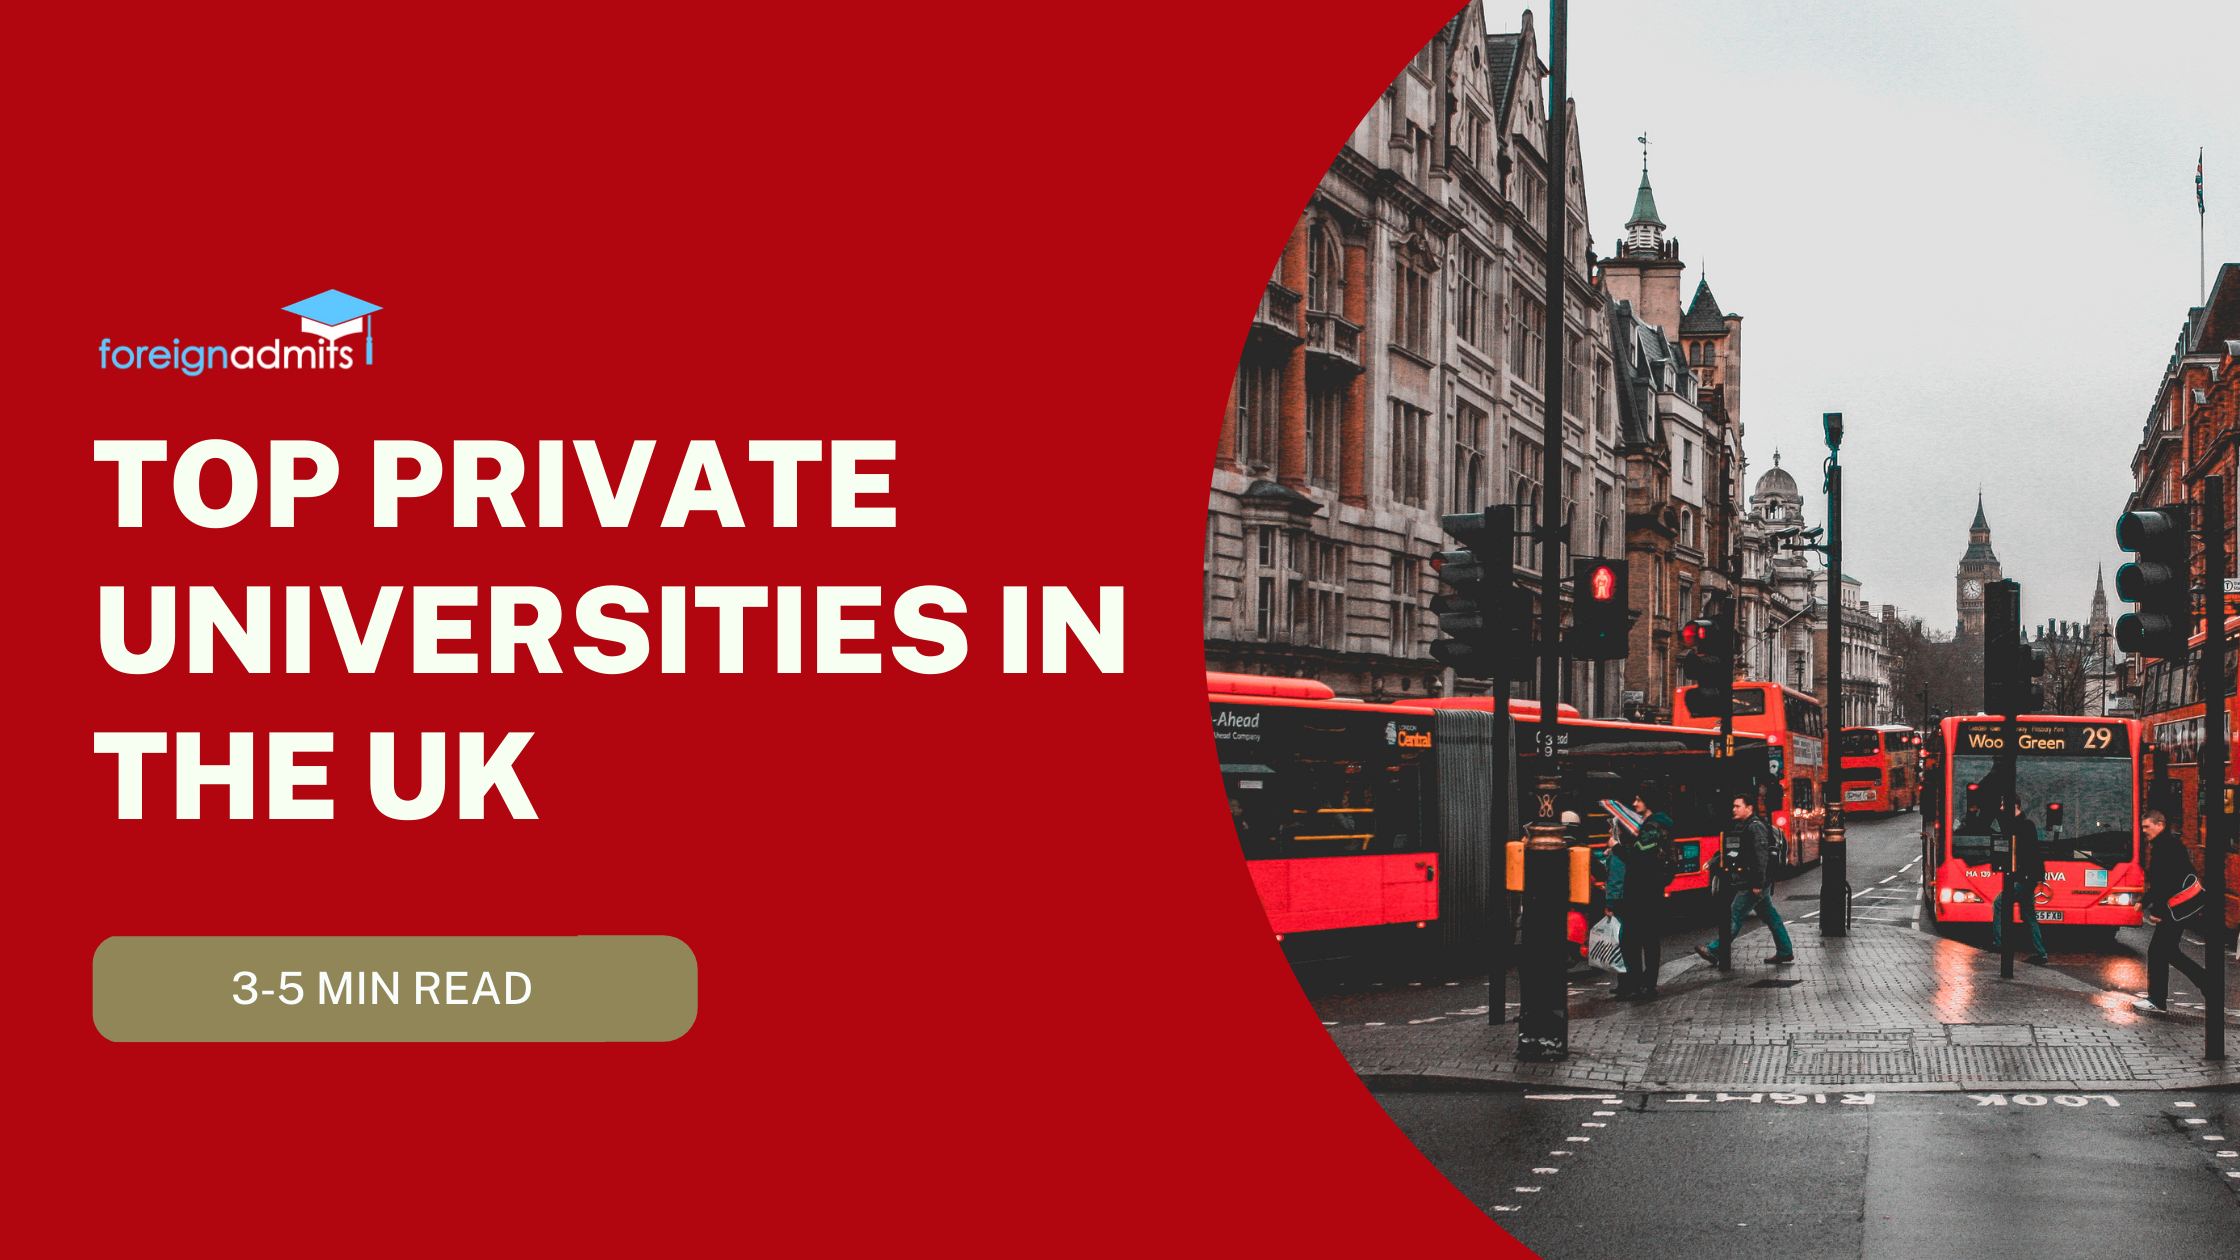 Top Private Universities in the UK